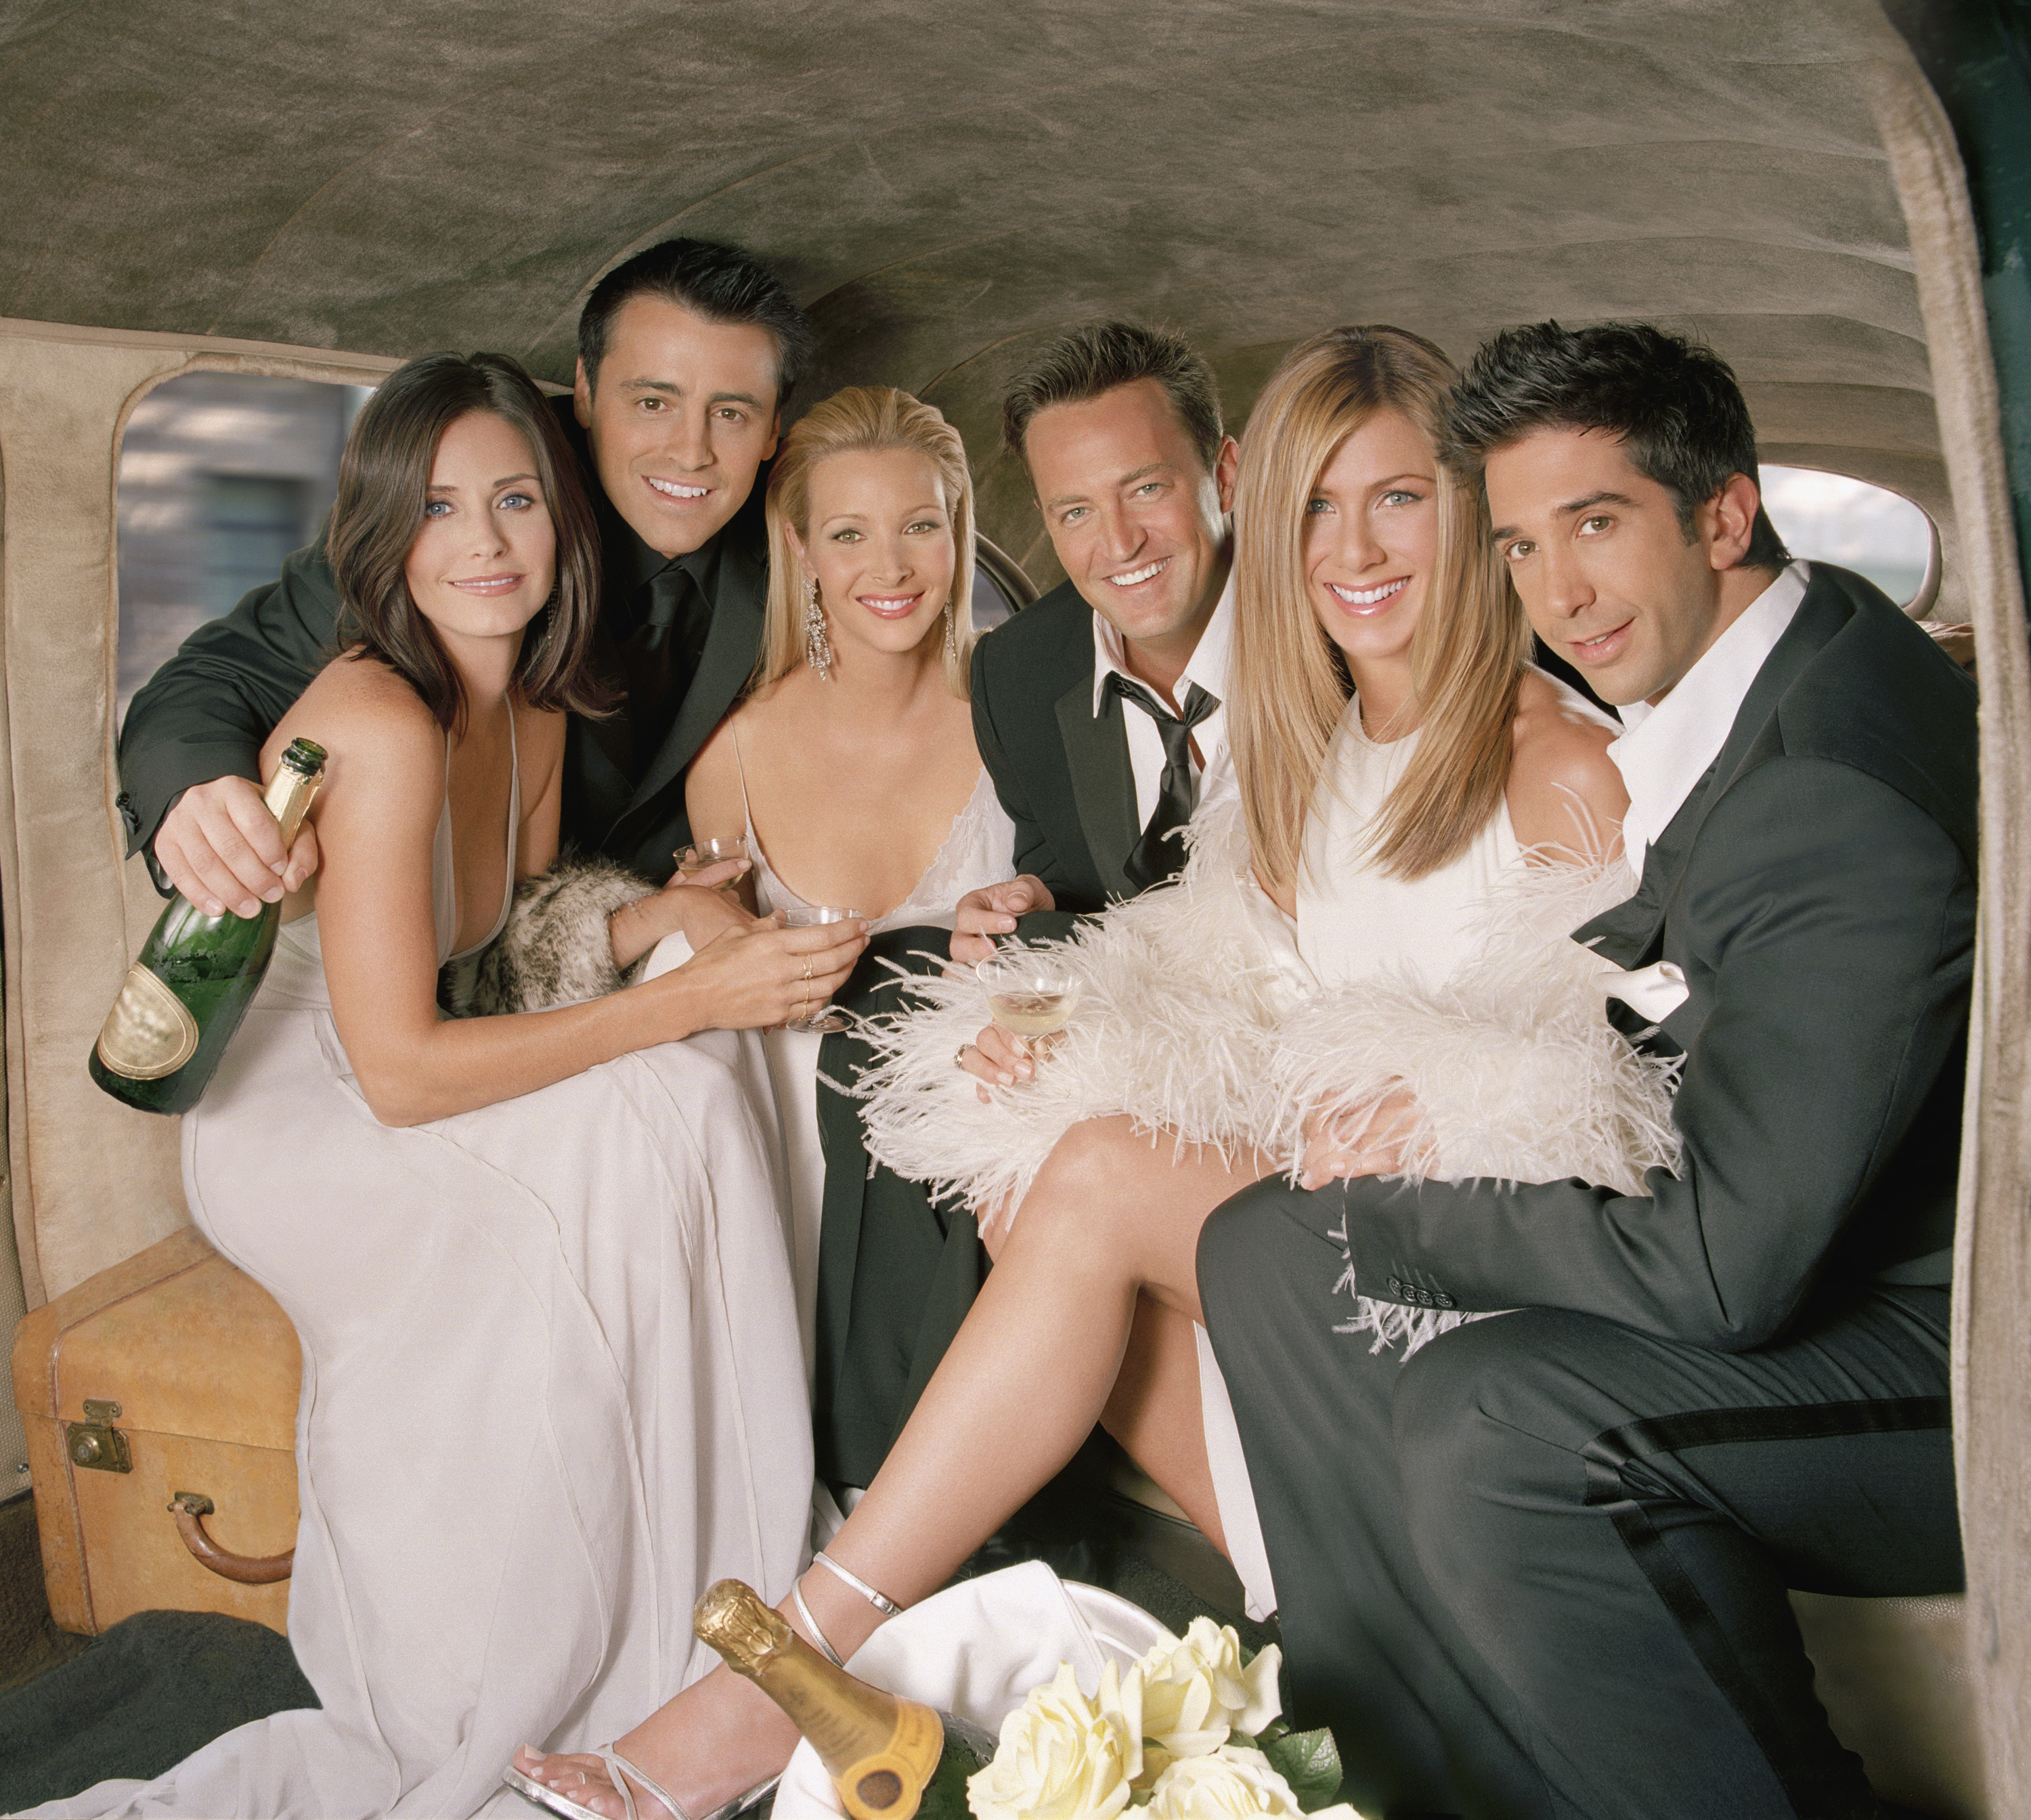 The six leads sitting together with bottles of champagne in a scene from the show